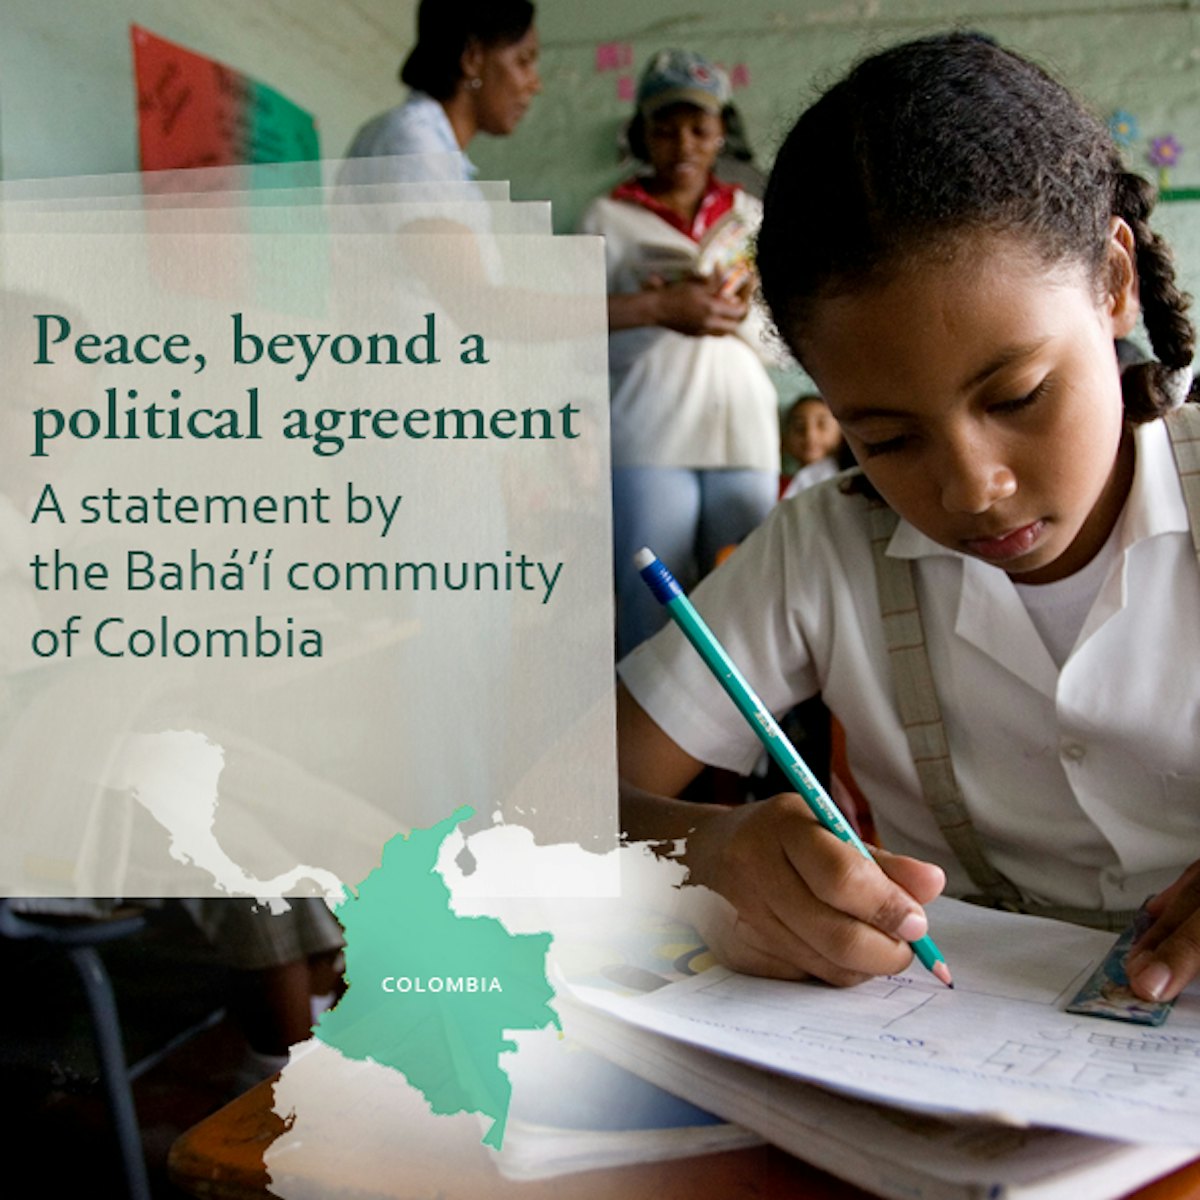 The Colombian Baha’i community released a statement titled "La Paz, mas alla de un acuerdo politico", which translates into English as "Peace, beyond a political agreement".